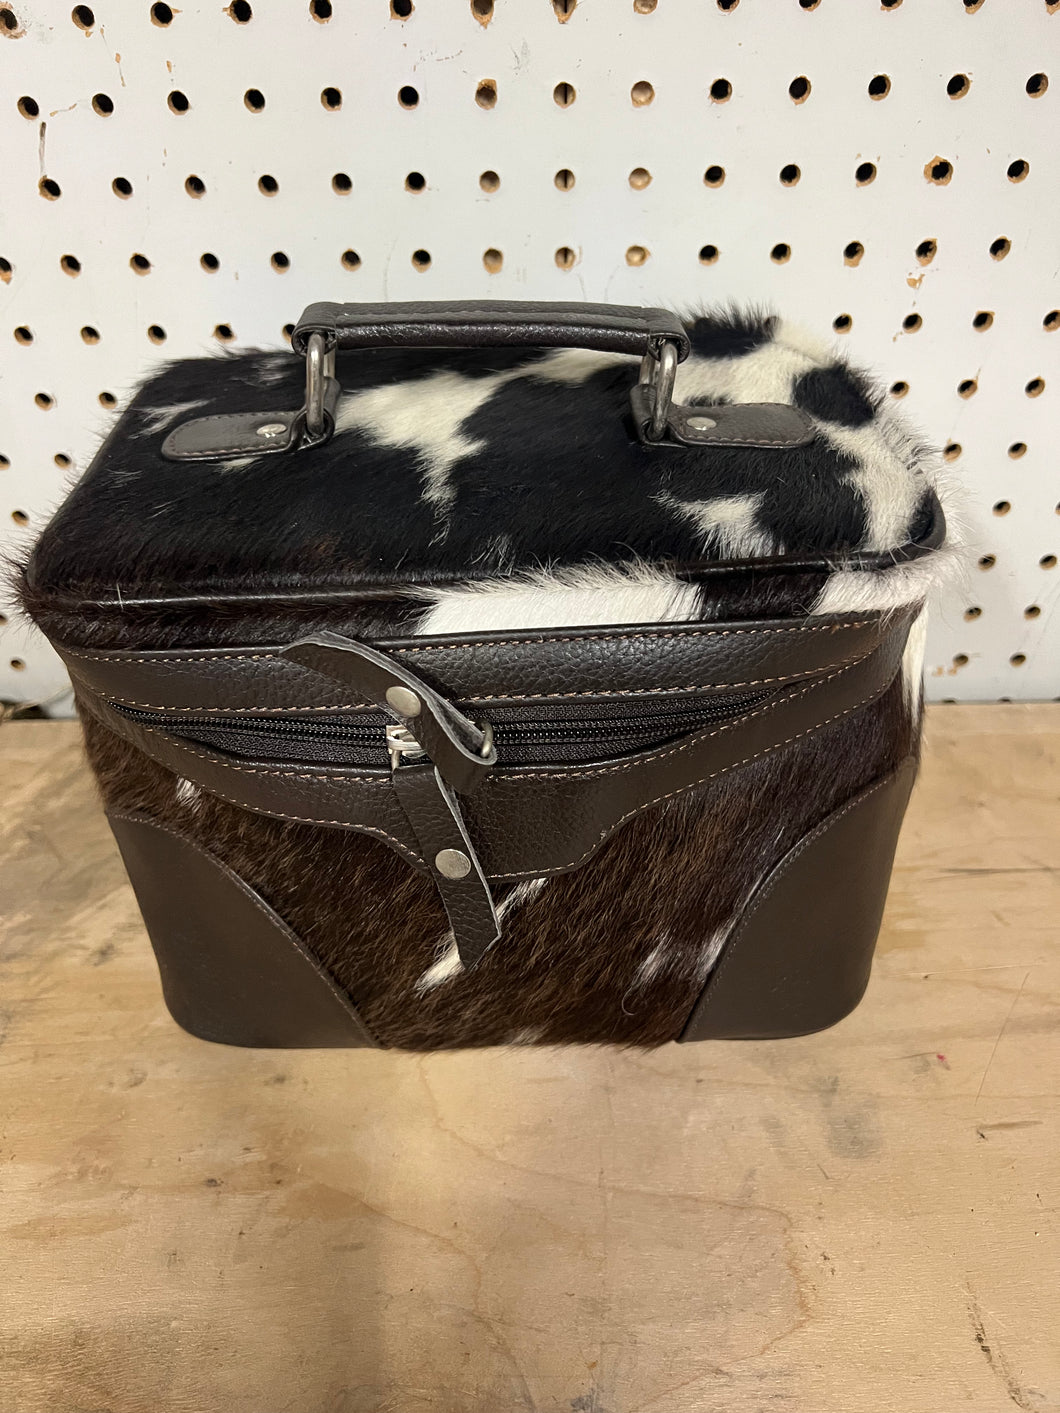 Cowhide & chocolate leather toiletry bag